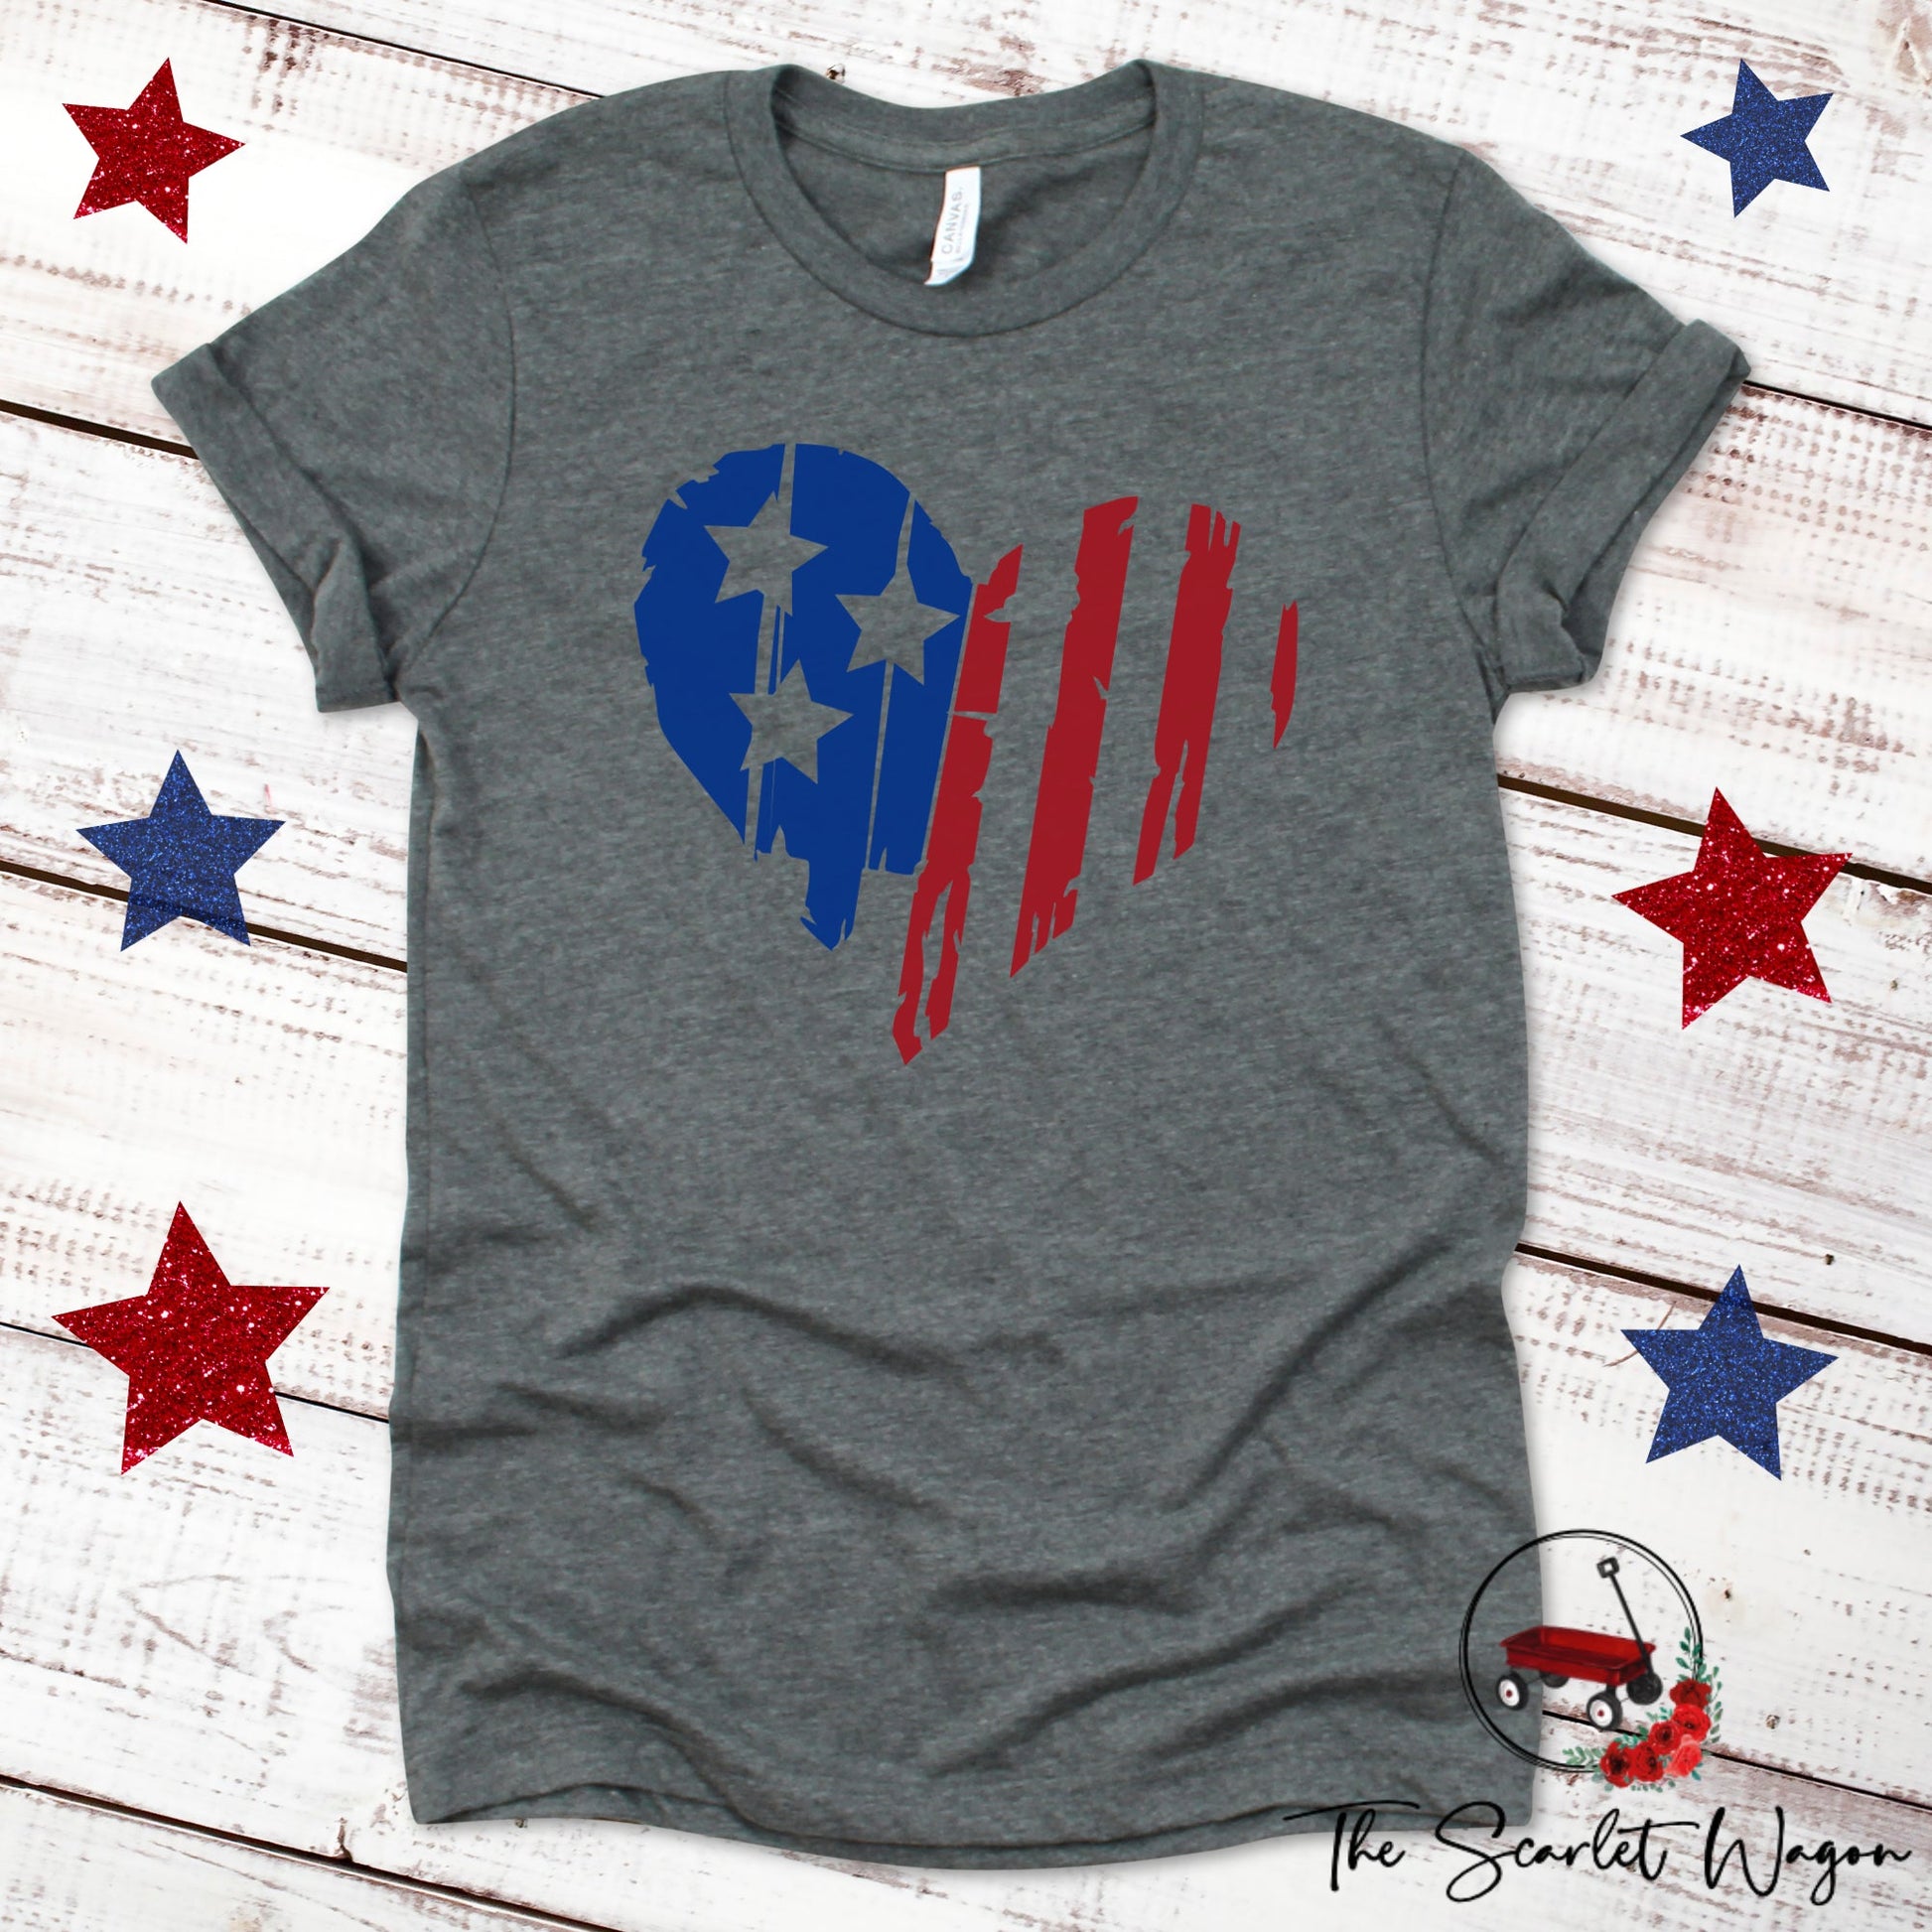 Distressed Heart-Shaped Flag Unisex Tee Patriotic Shirt The Scarlet Wagon Boutique Deep Heather Gray XS 